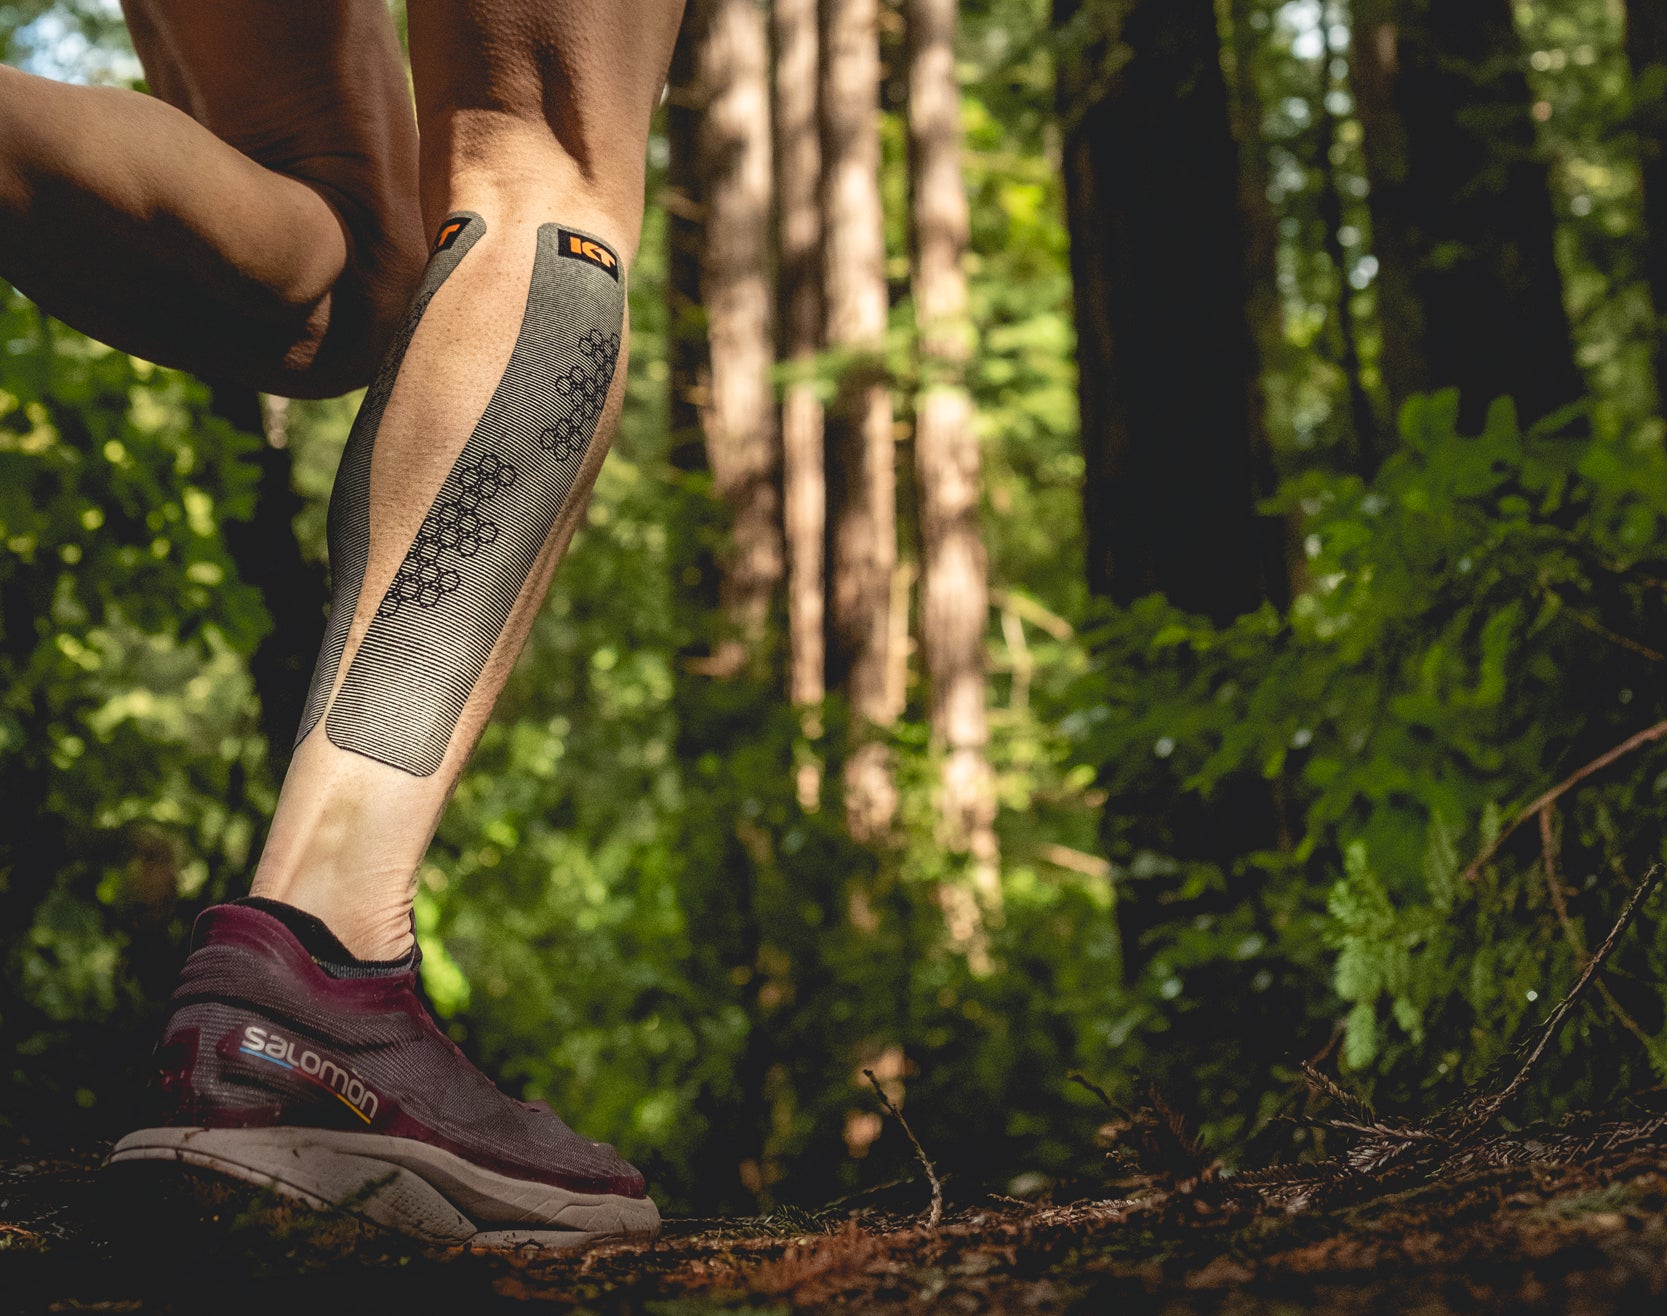 Tips for pain free trail running